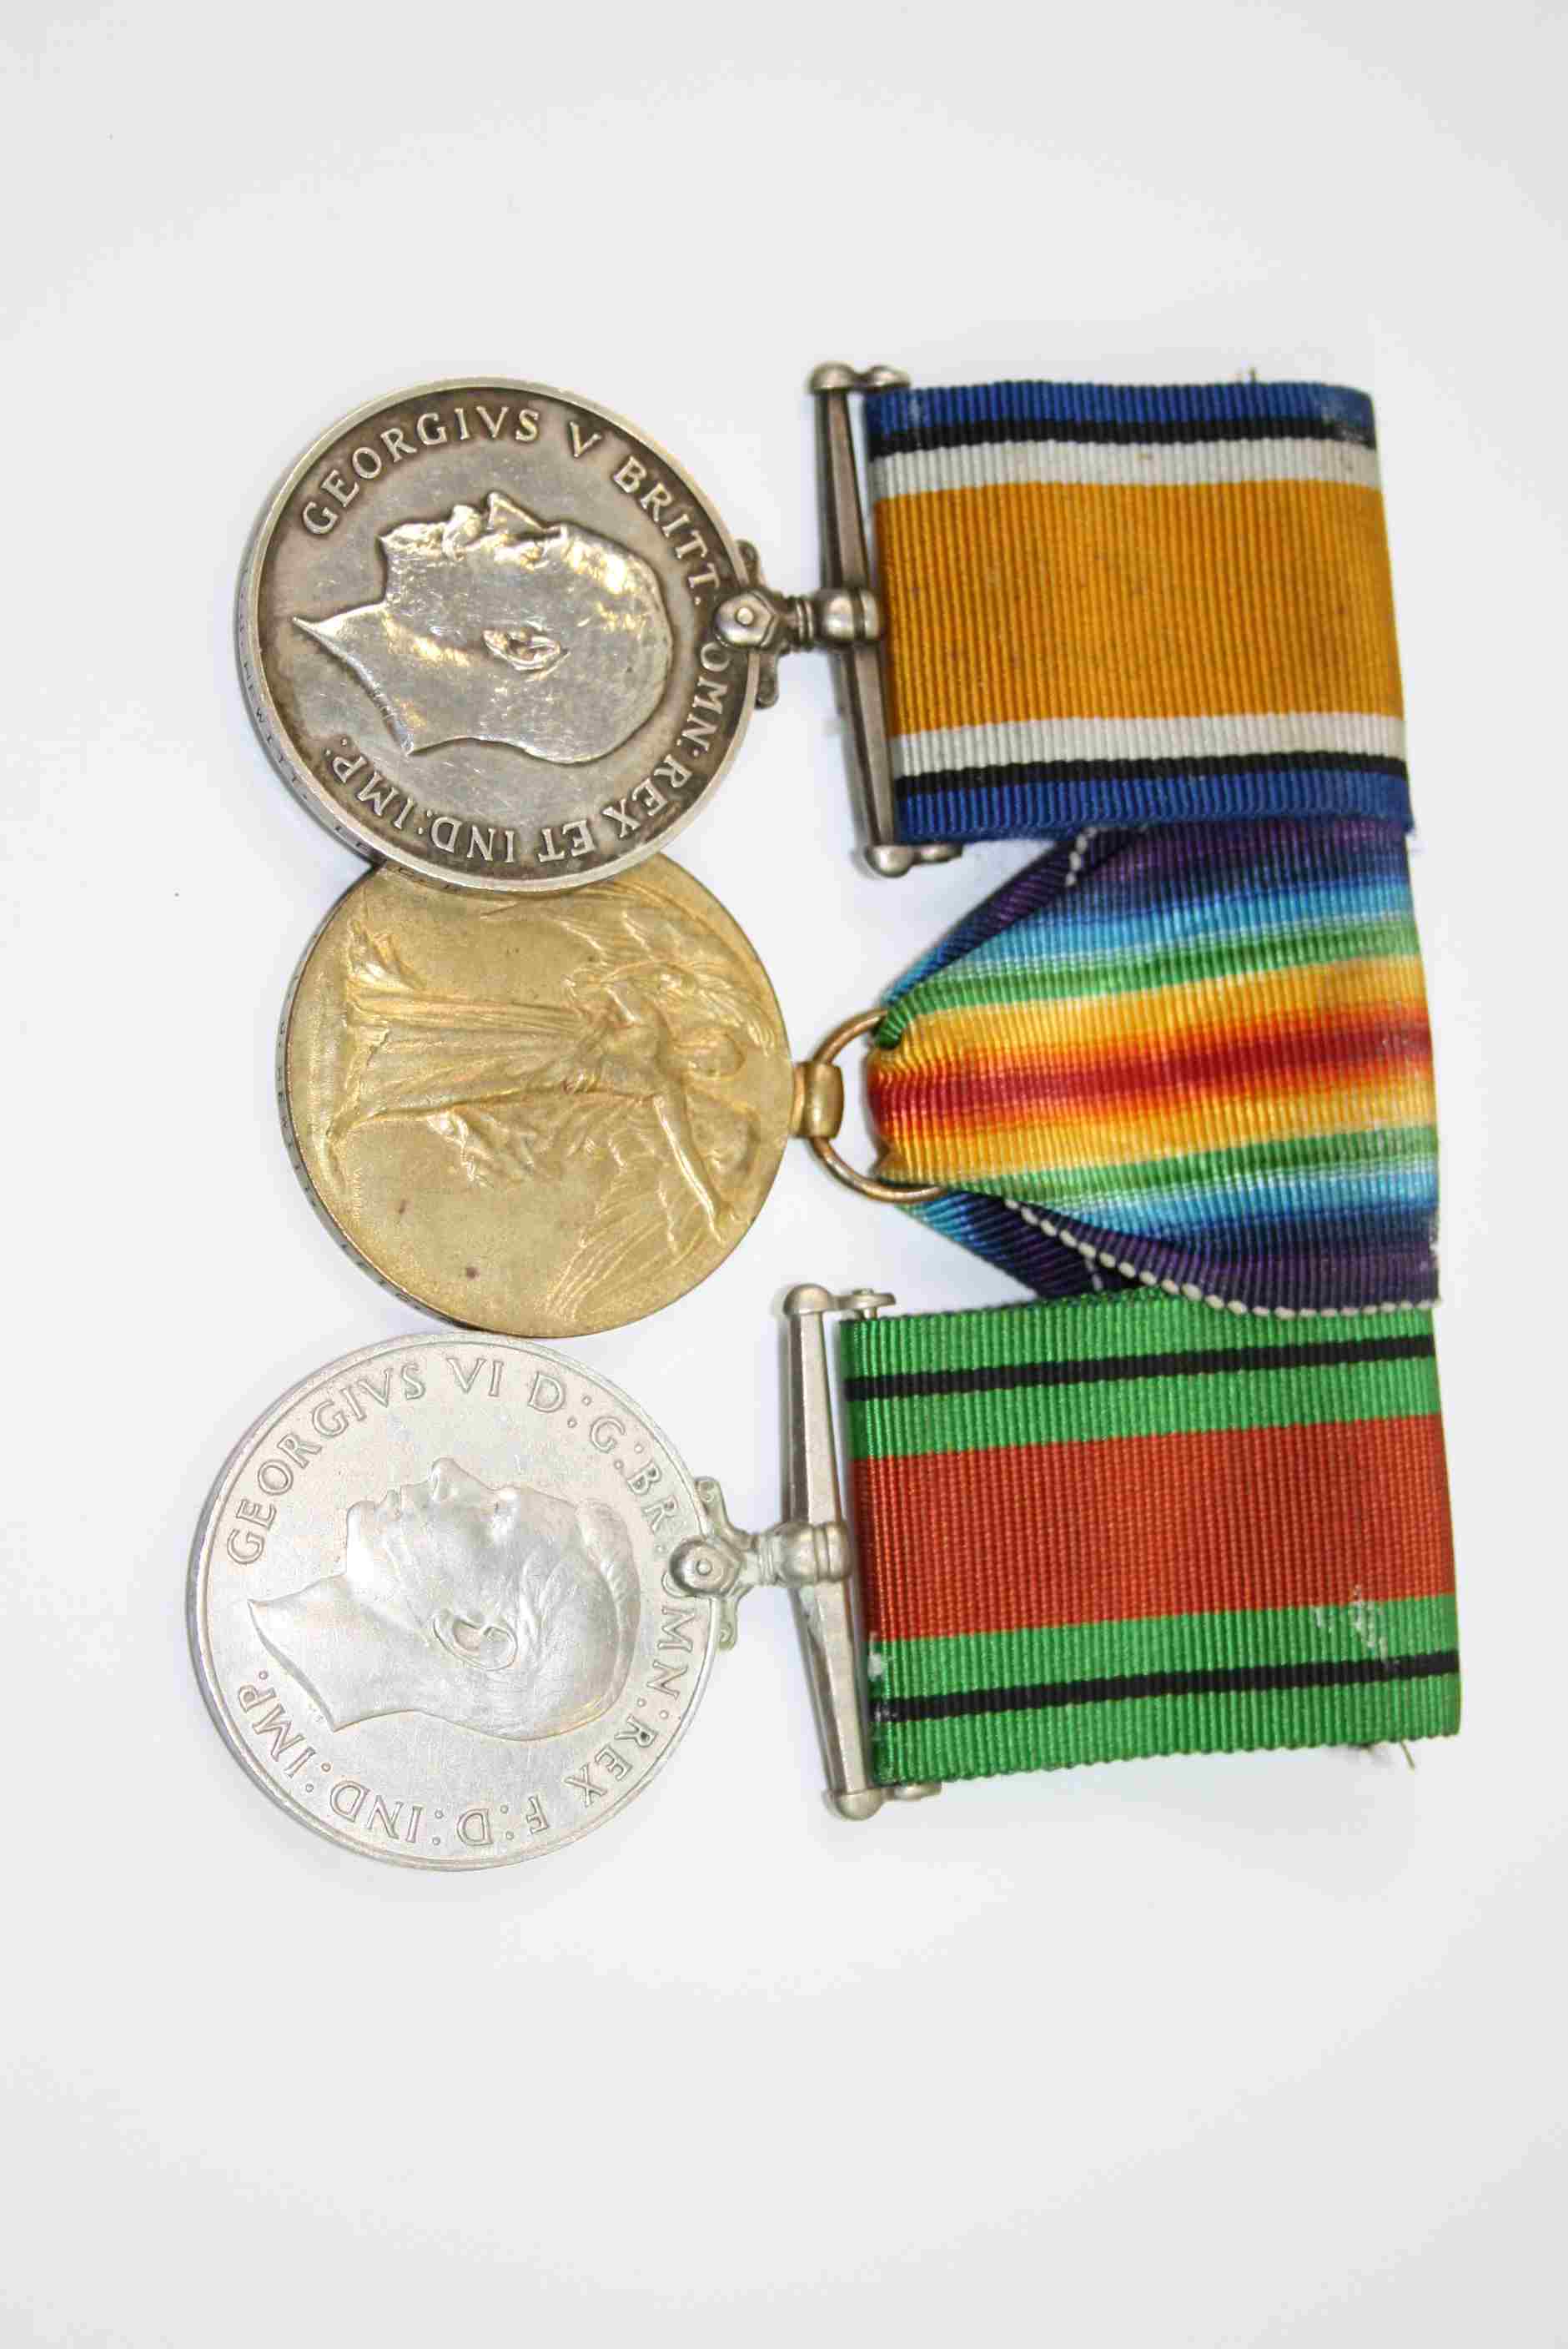 A Full Size British World War One Medal Pair Issued To 42517 PTE. L.J. HEWITT Of The